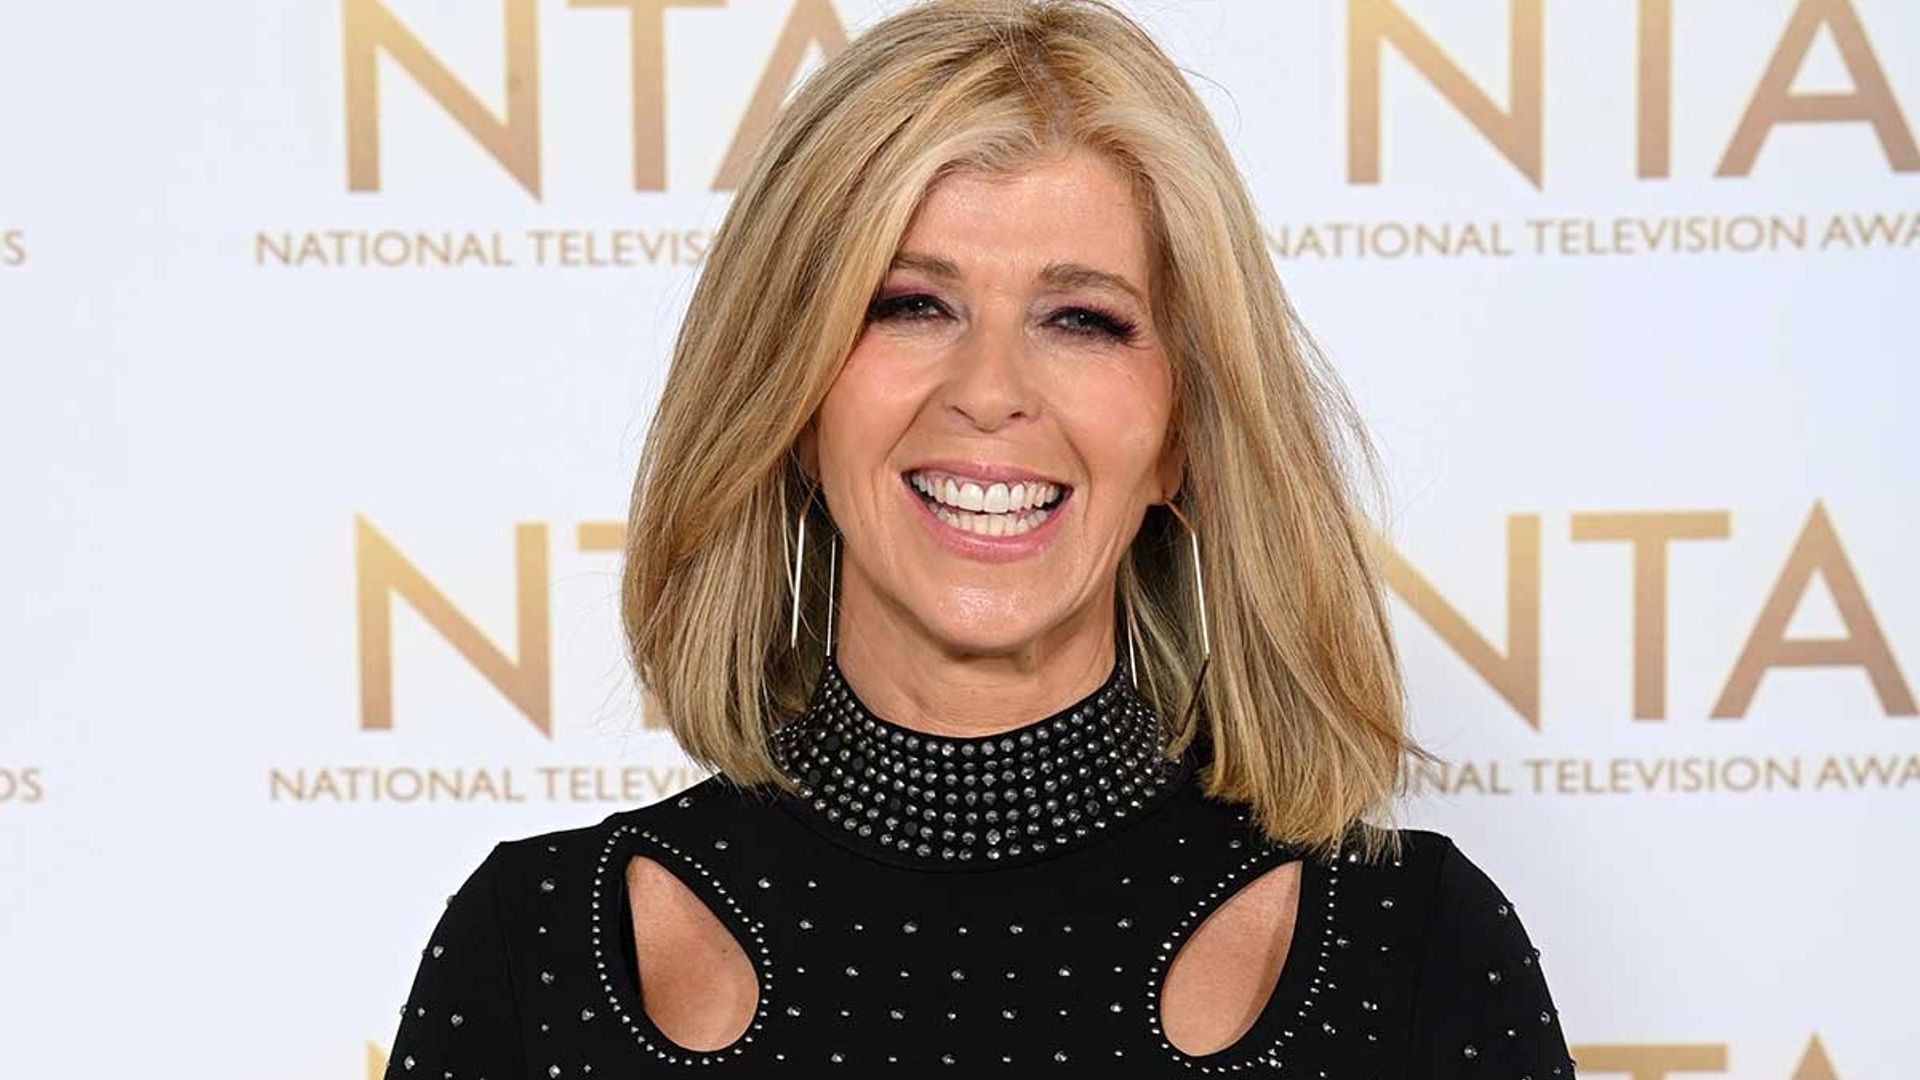 Kate Garraway joined by surprise date at National Television Awards- see who